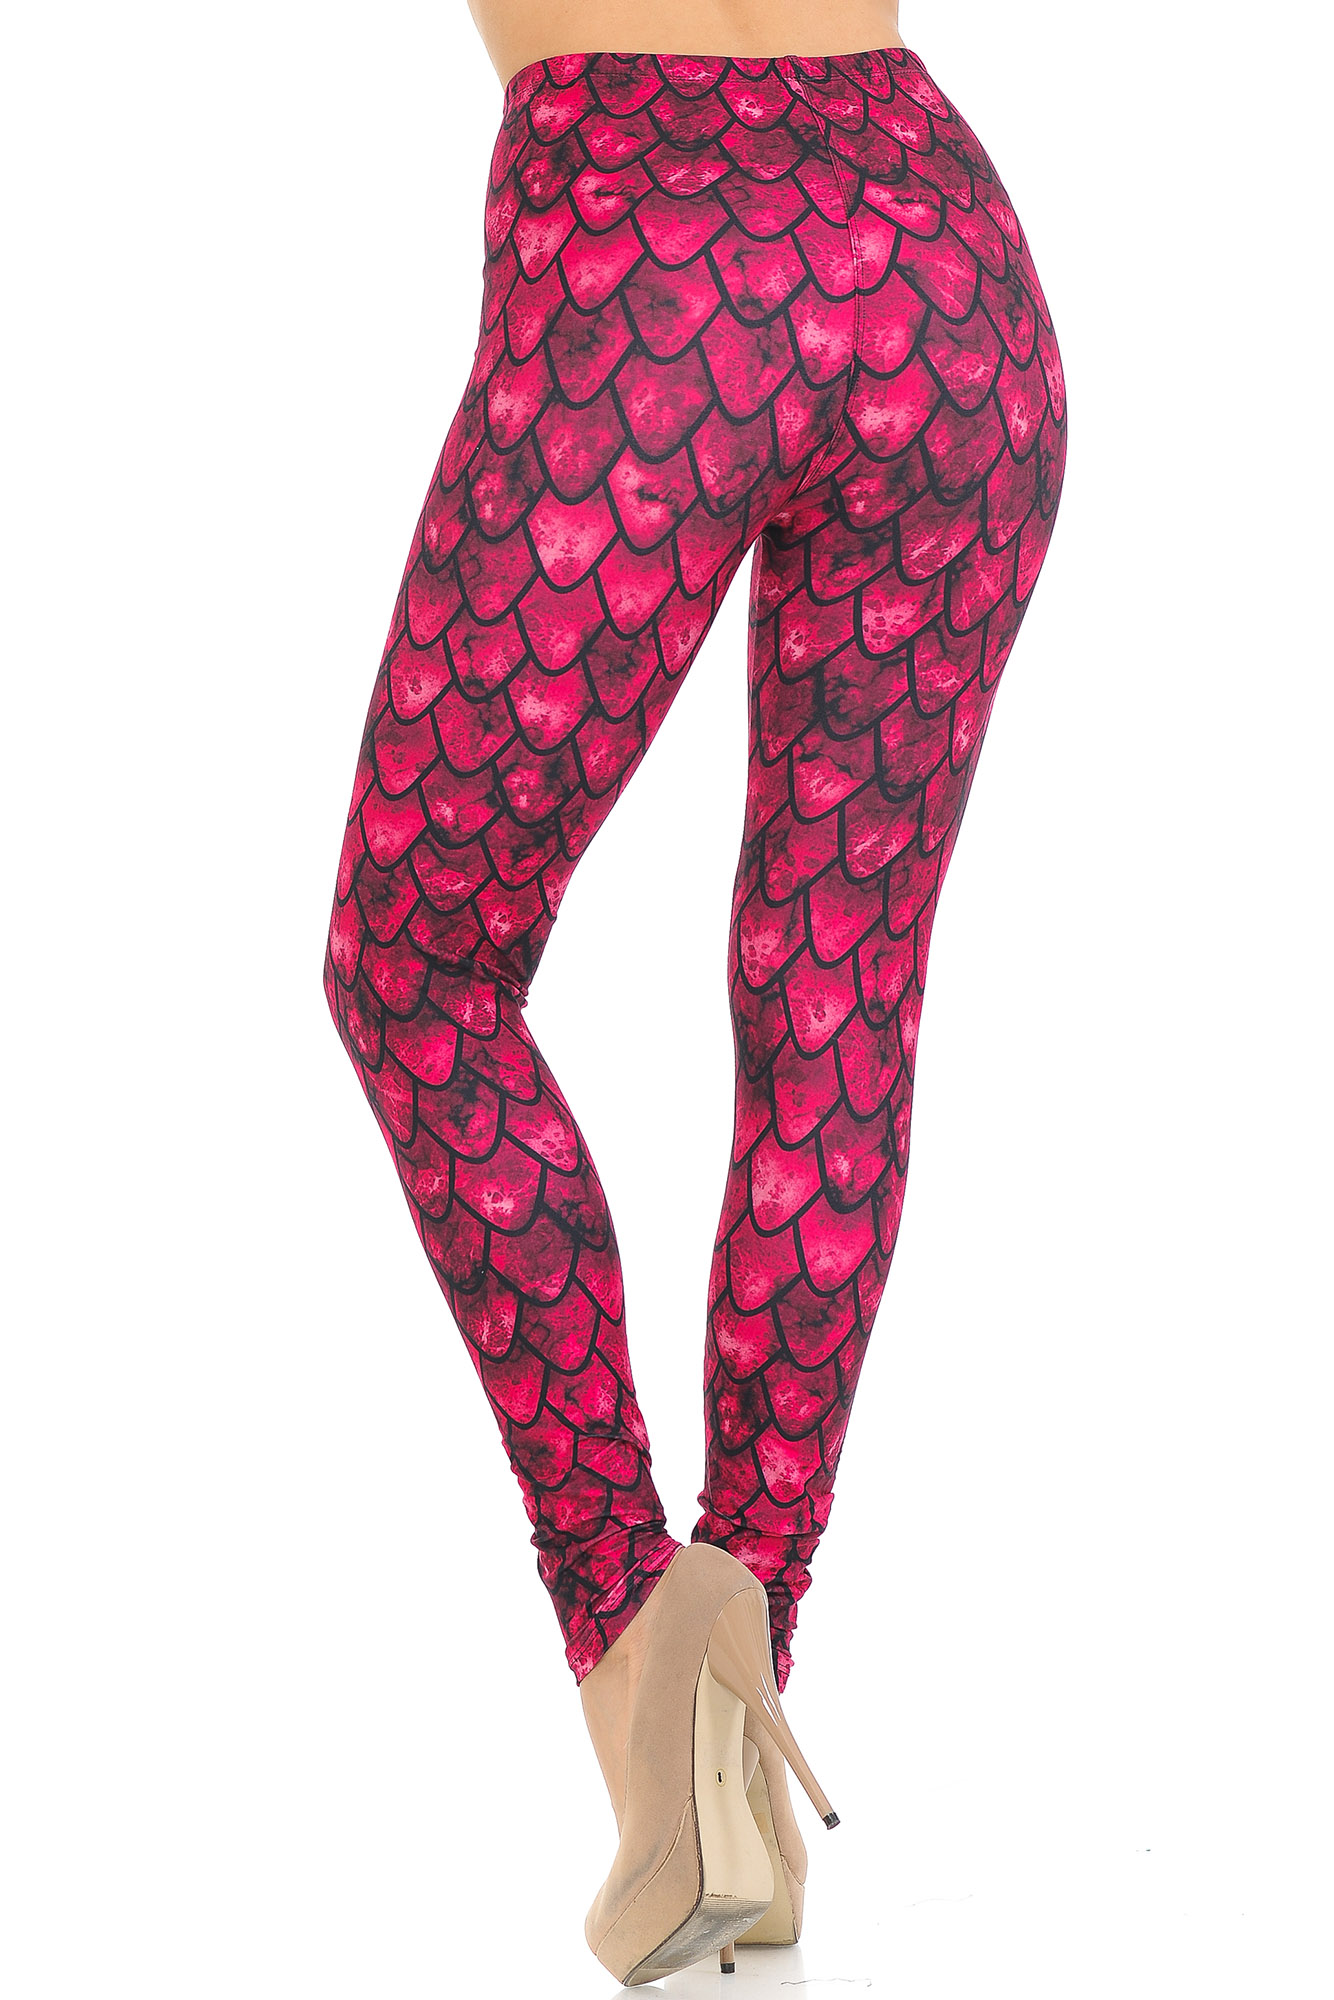 Wholesale Creamy Soft Red Scale Extra Small Leggings - USA Fashion™